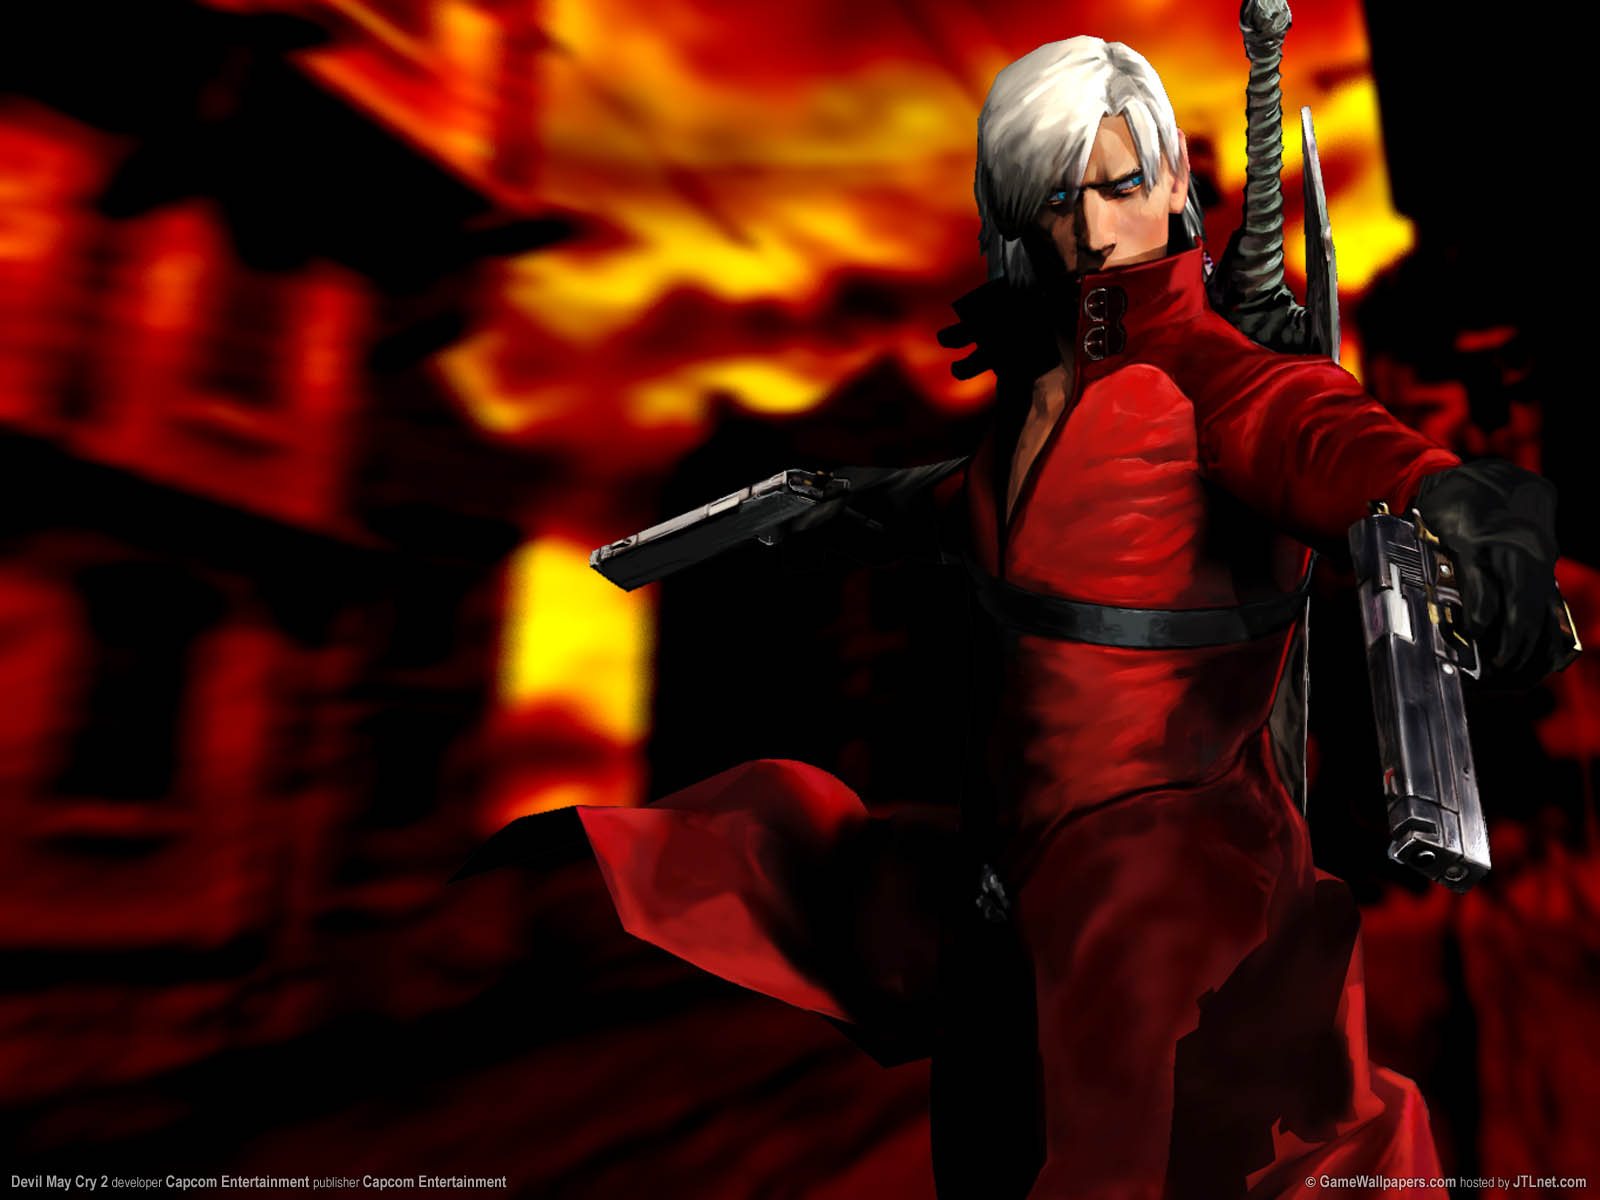 Devil May Cry 2 achtergrond 01 1600x1200